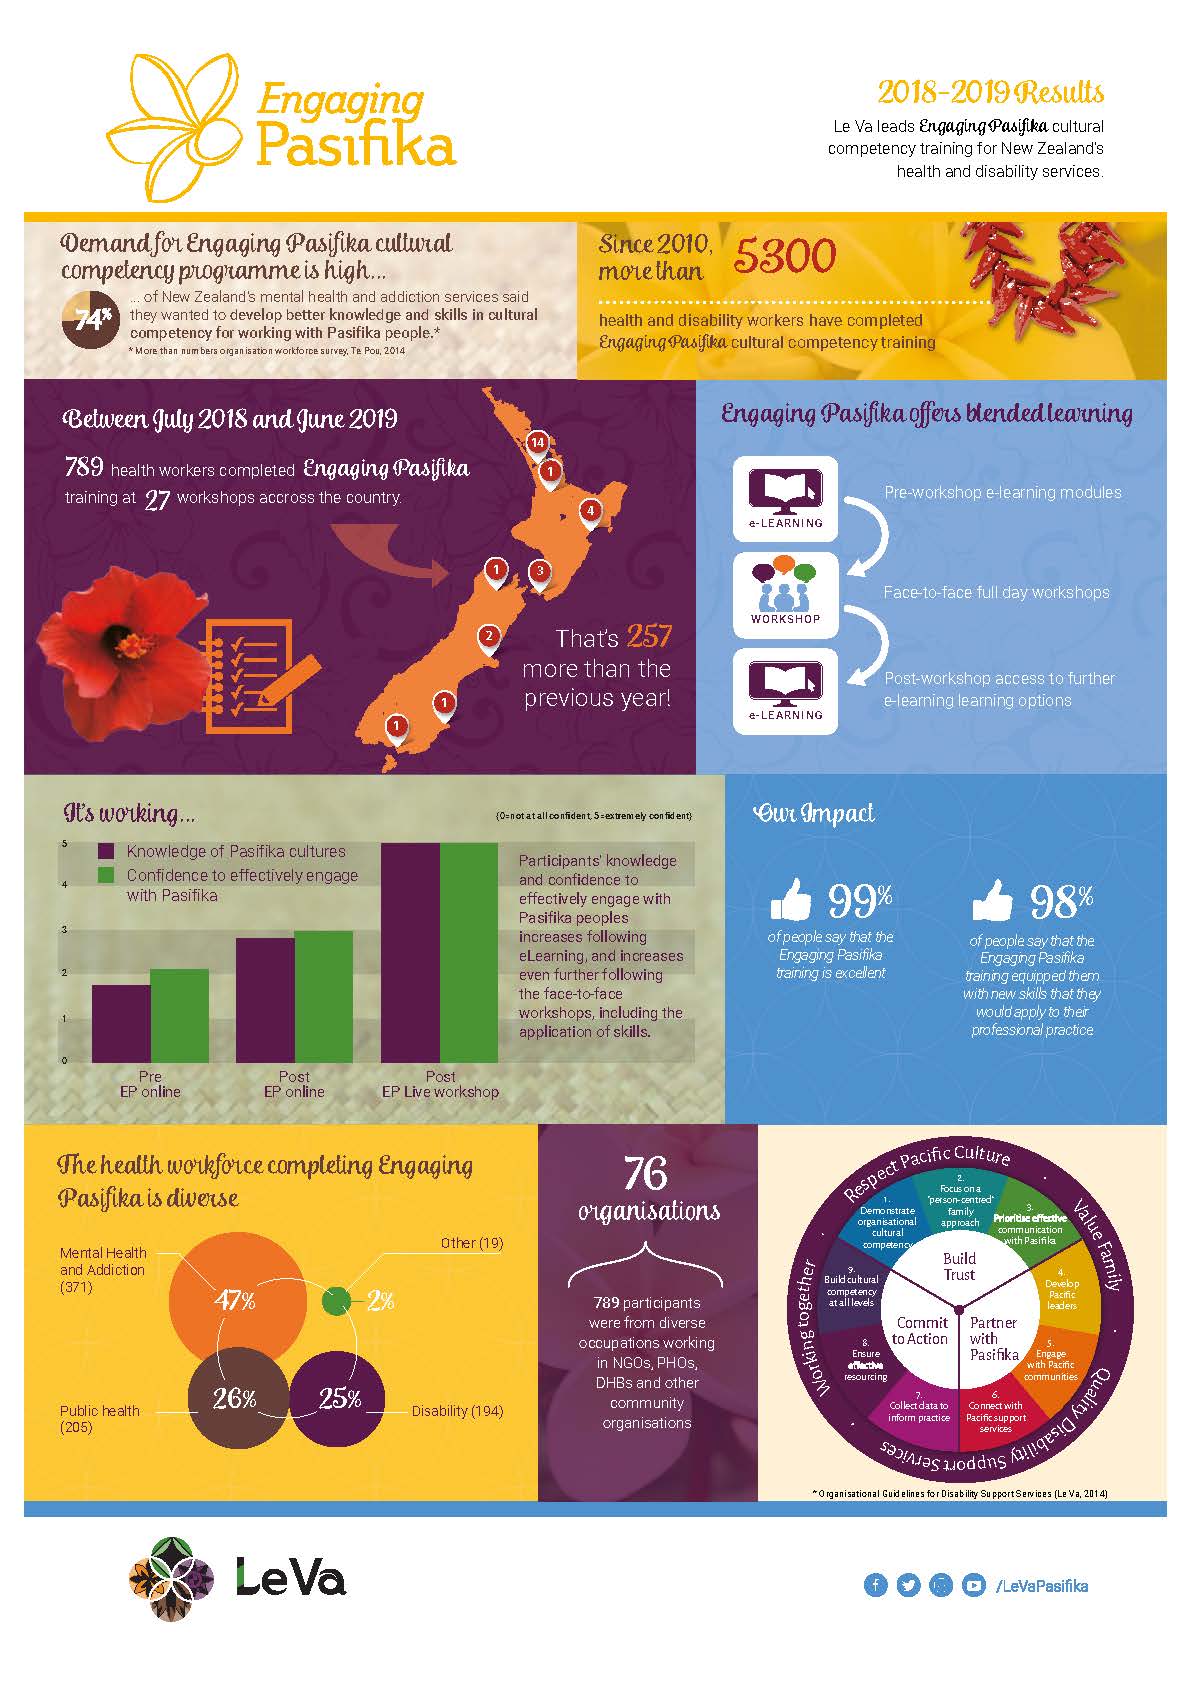 Engaging Pasifika results 2018-2019 infographic